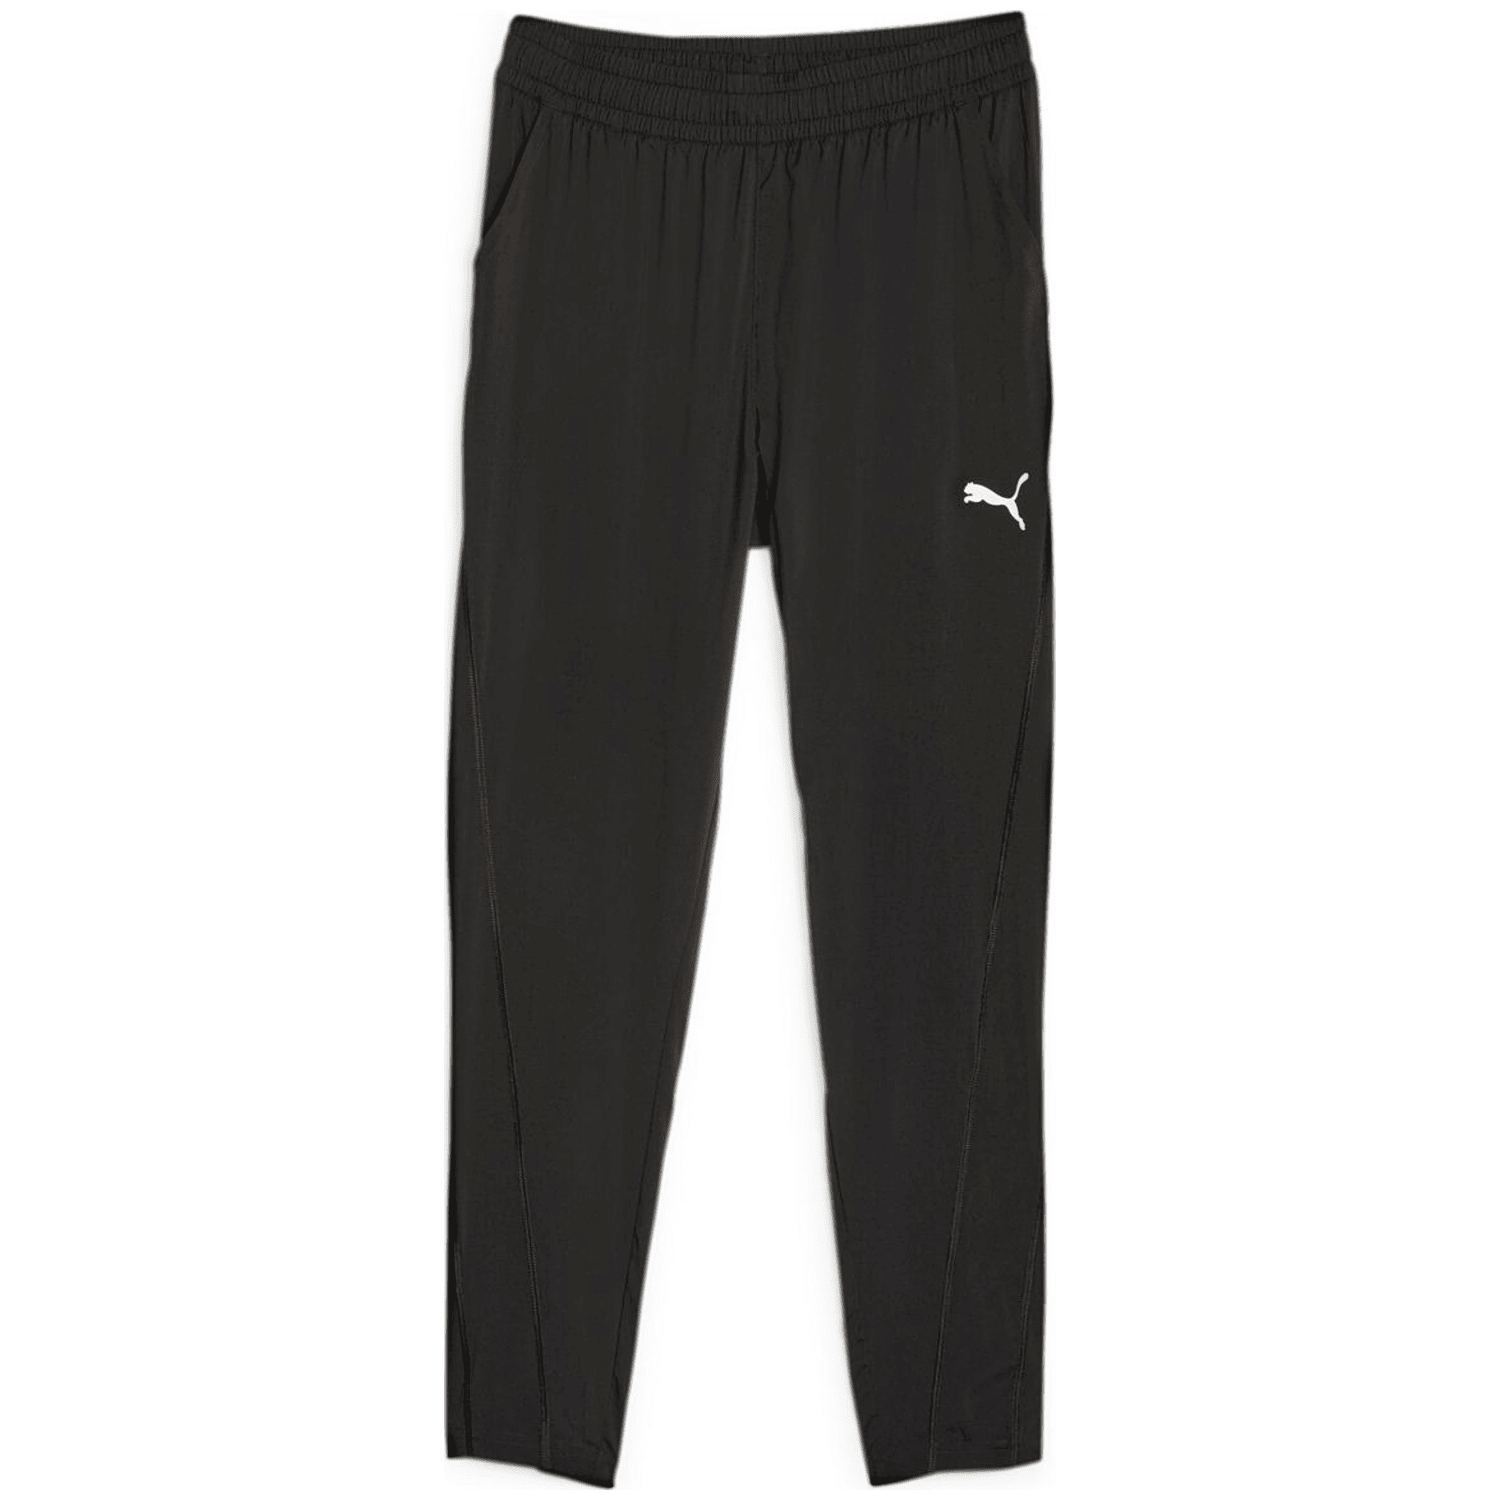 Puma Fit Woven Tapered Herren Sporthose